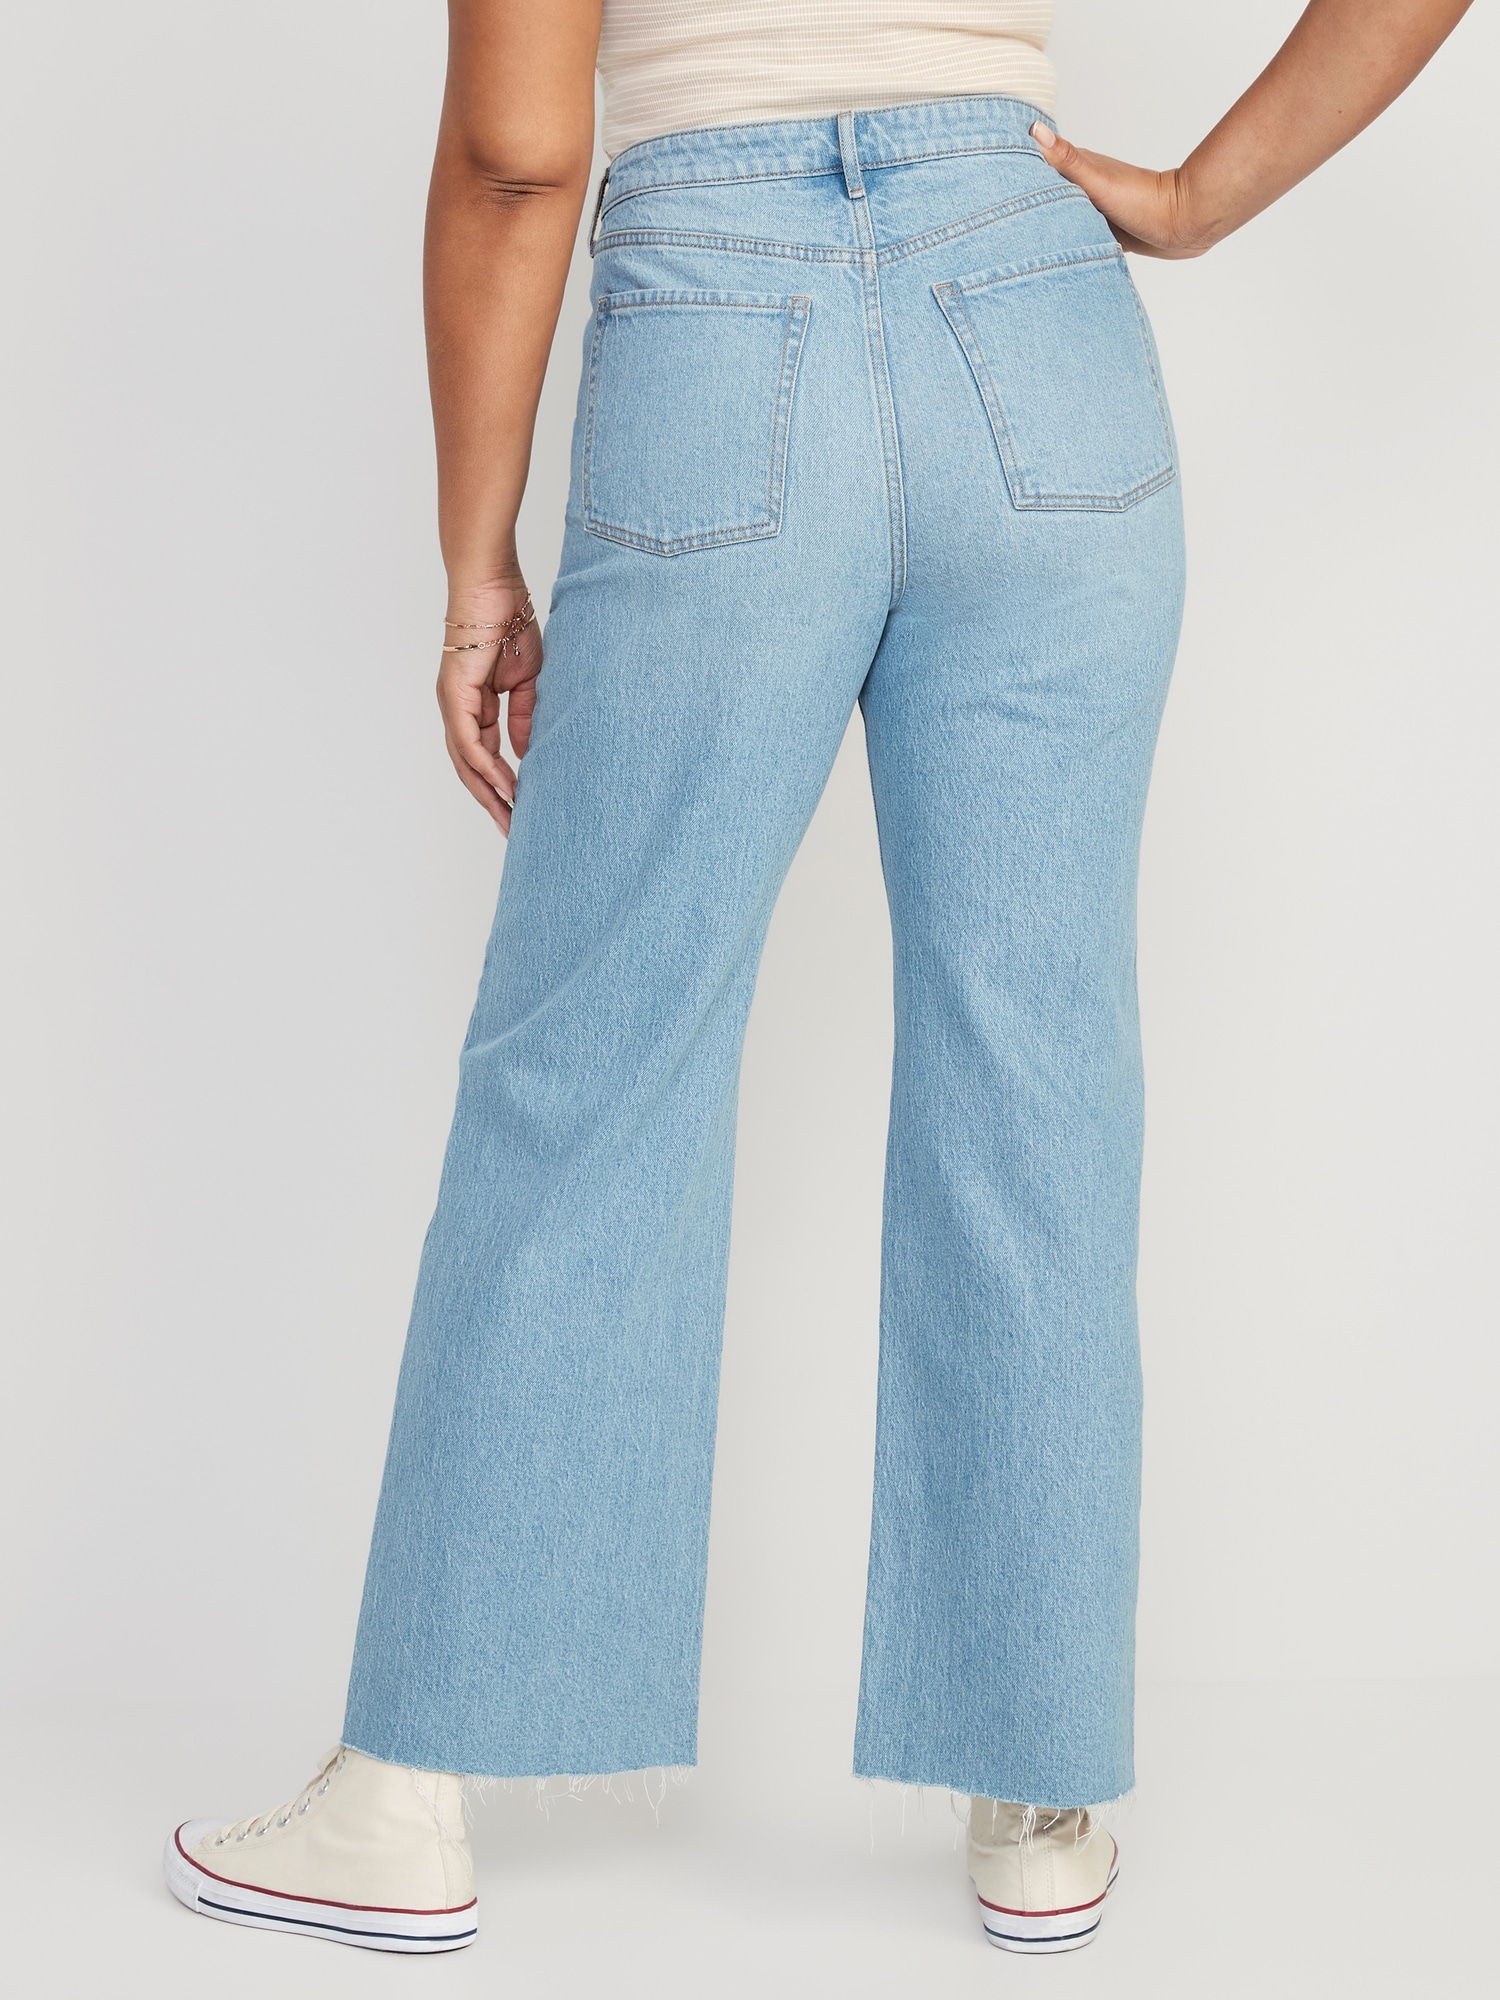 Extra High-Waisted Cut-Off Wide-Leg Jeans | Old Navy